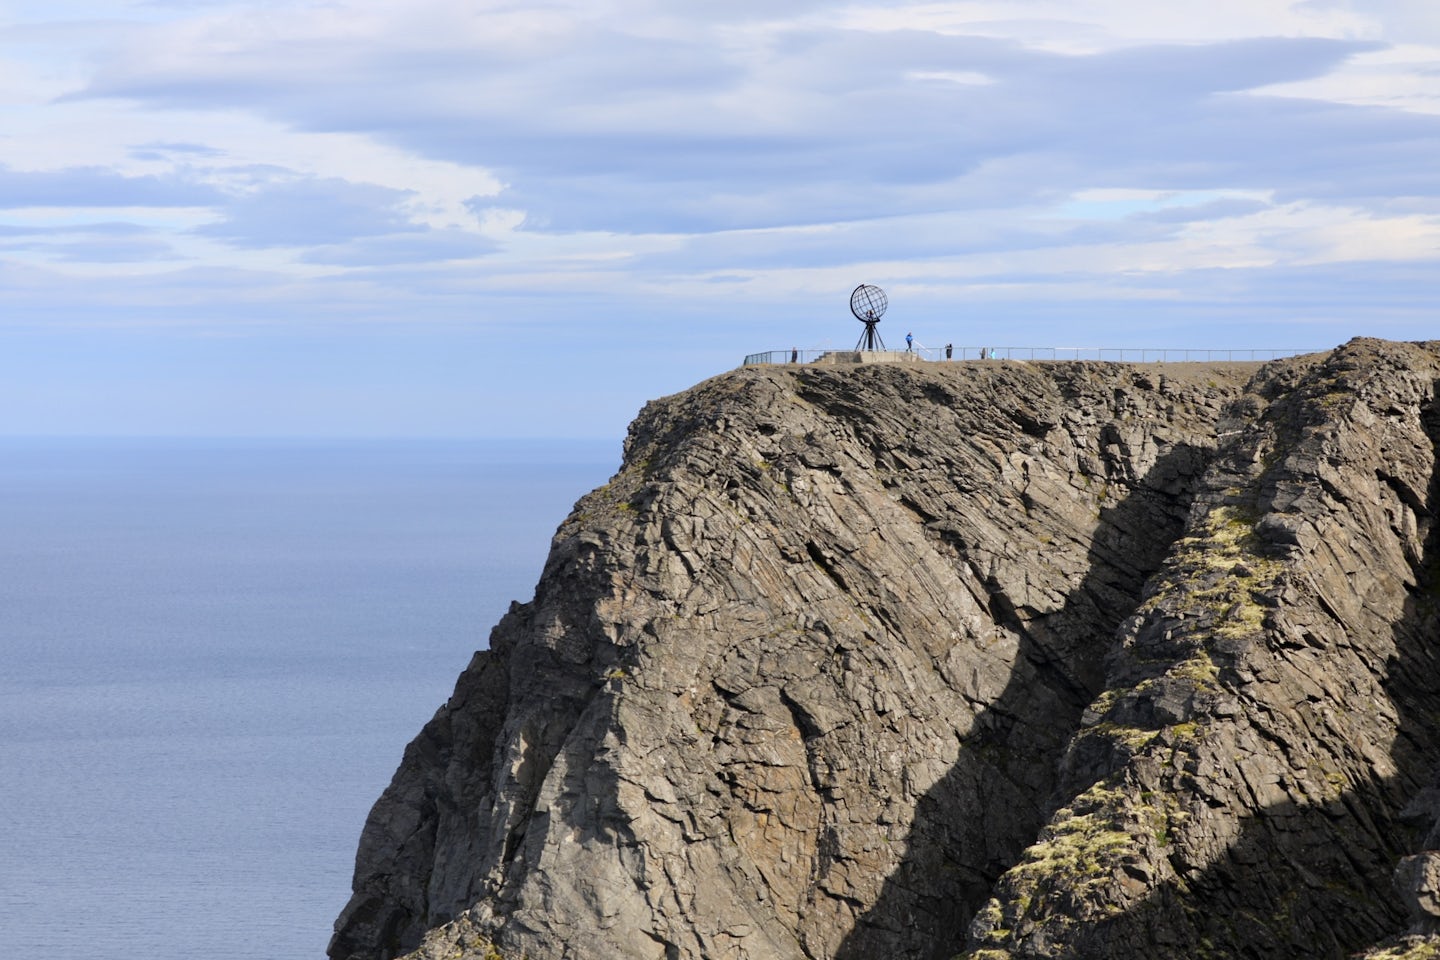 Nordkapp at noontime on a sunny day with almost no people - that’s the situation after the C19 pandemic.